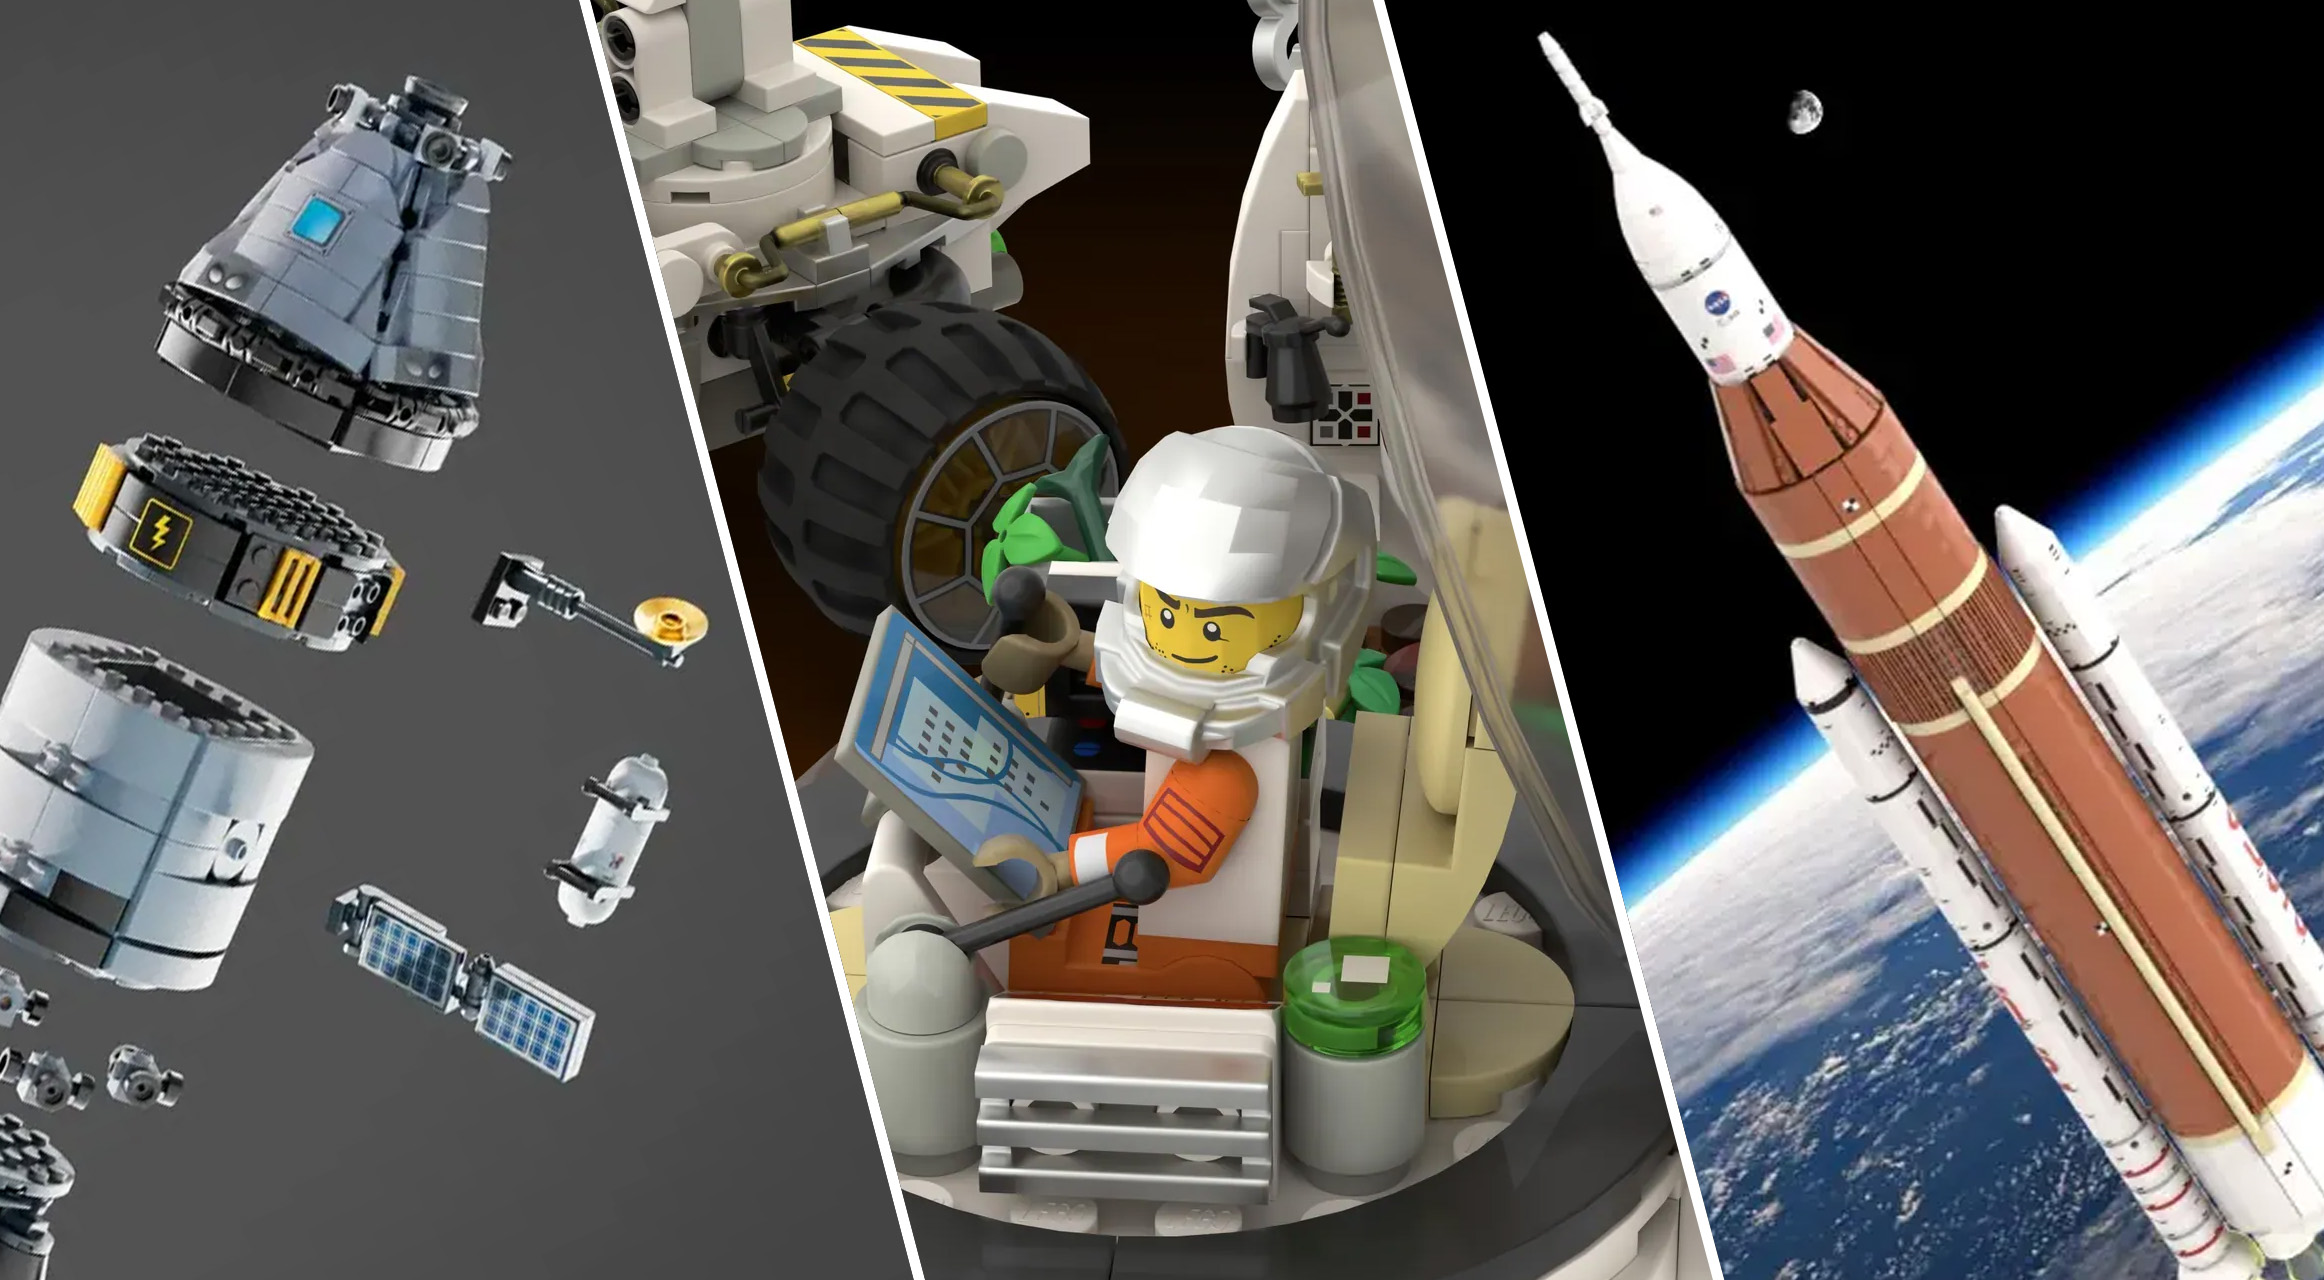 These Lego Ideas SLS rocket, Kerbal Space Program and ‘The Martian’ concepts are incredible, and we hope they get made Space